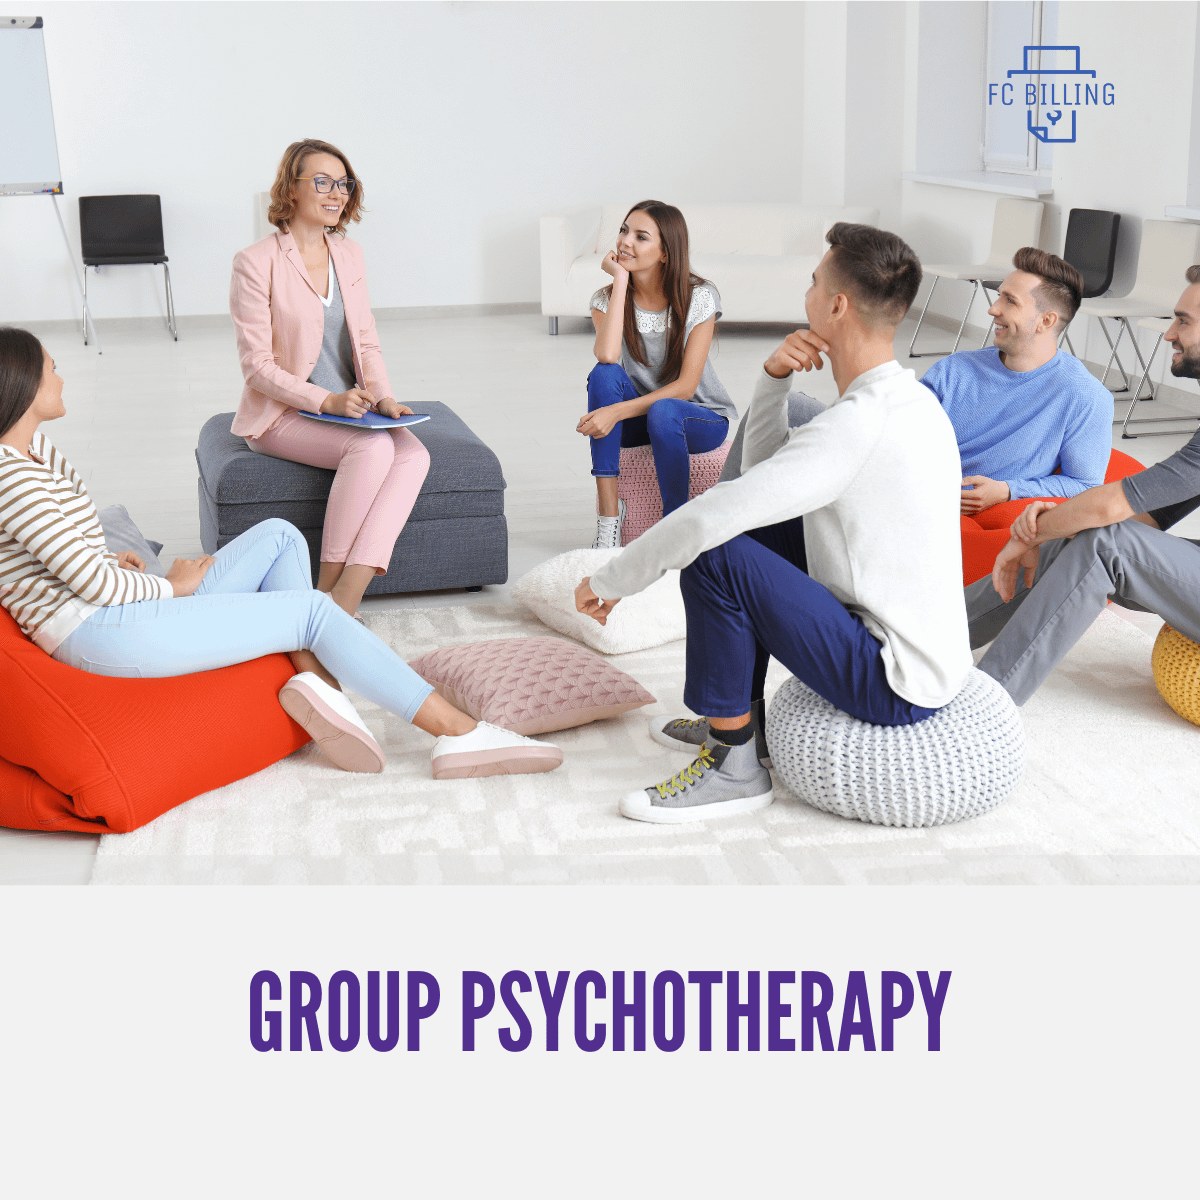 Group psychotherapy billing services